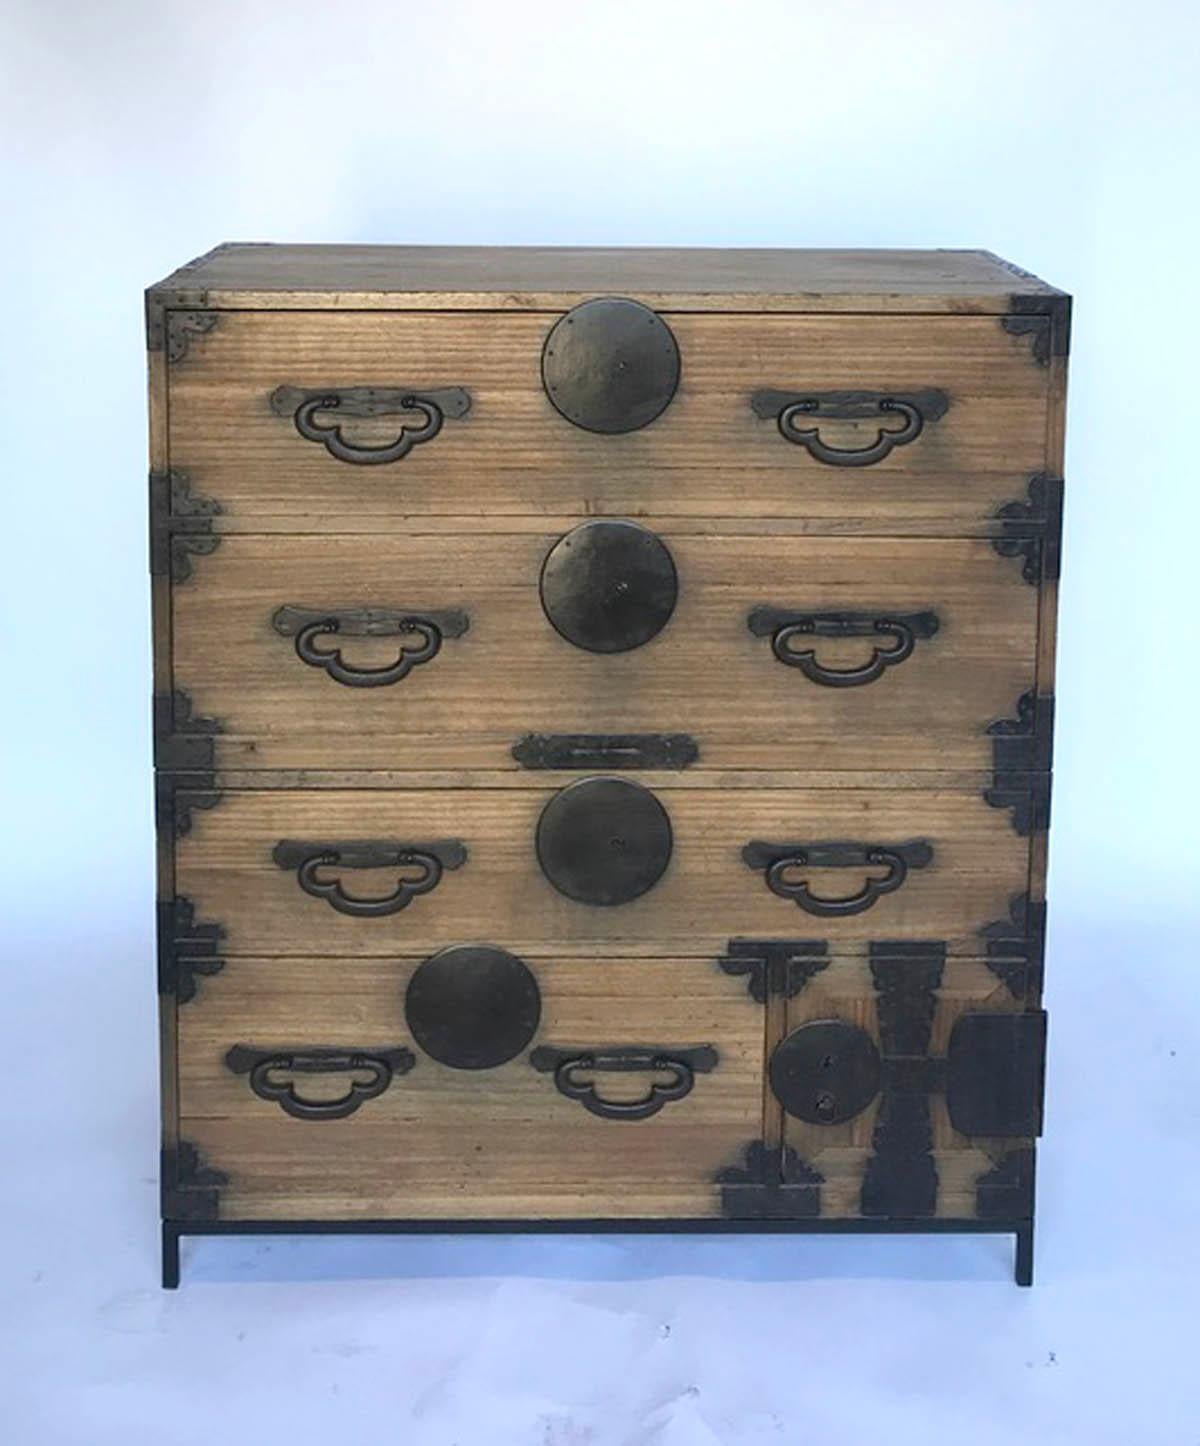 Very functional, hinoki wood Japanese tansu on custom iron base. This tansu has four drawers and one small compartment with two drawers. All original. Works as a chest of drawers or can be separated and used as nightstands or side tables. Smoothly